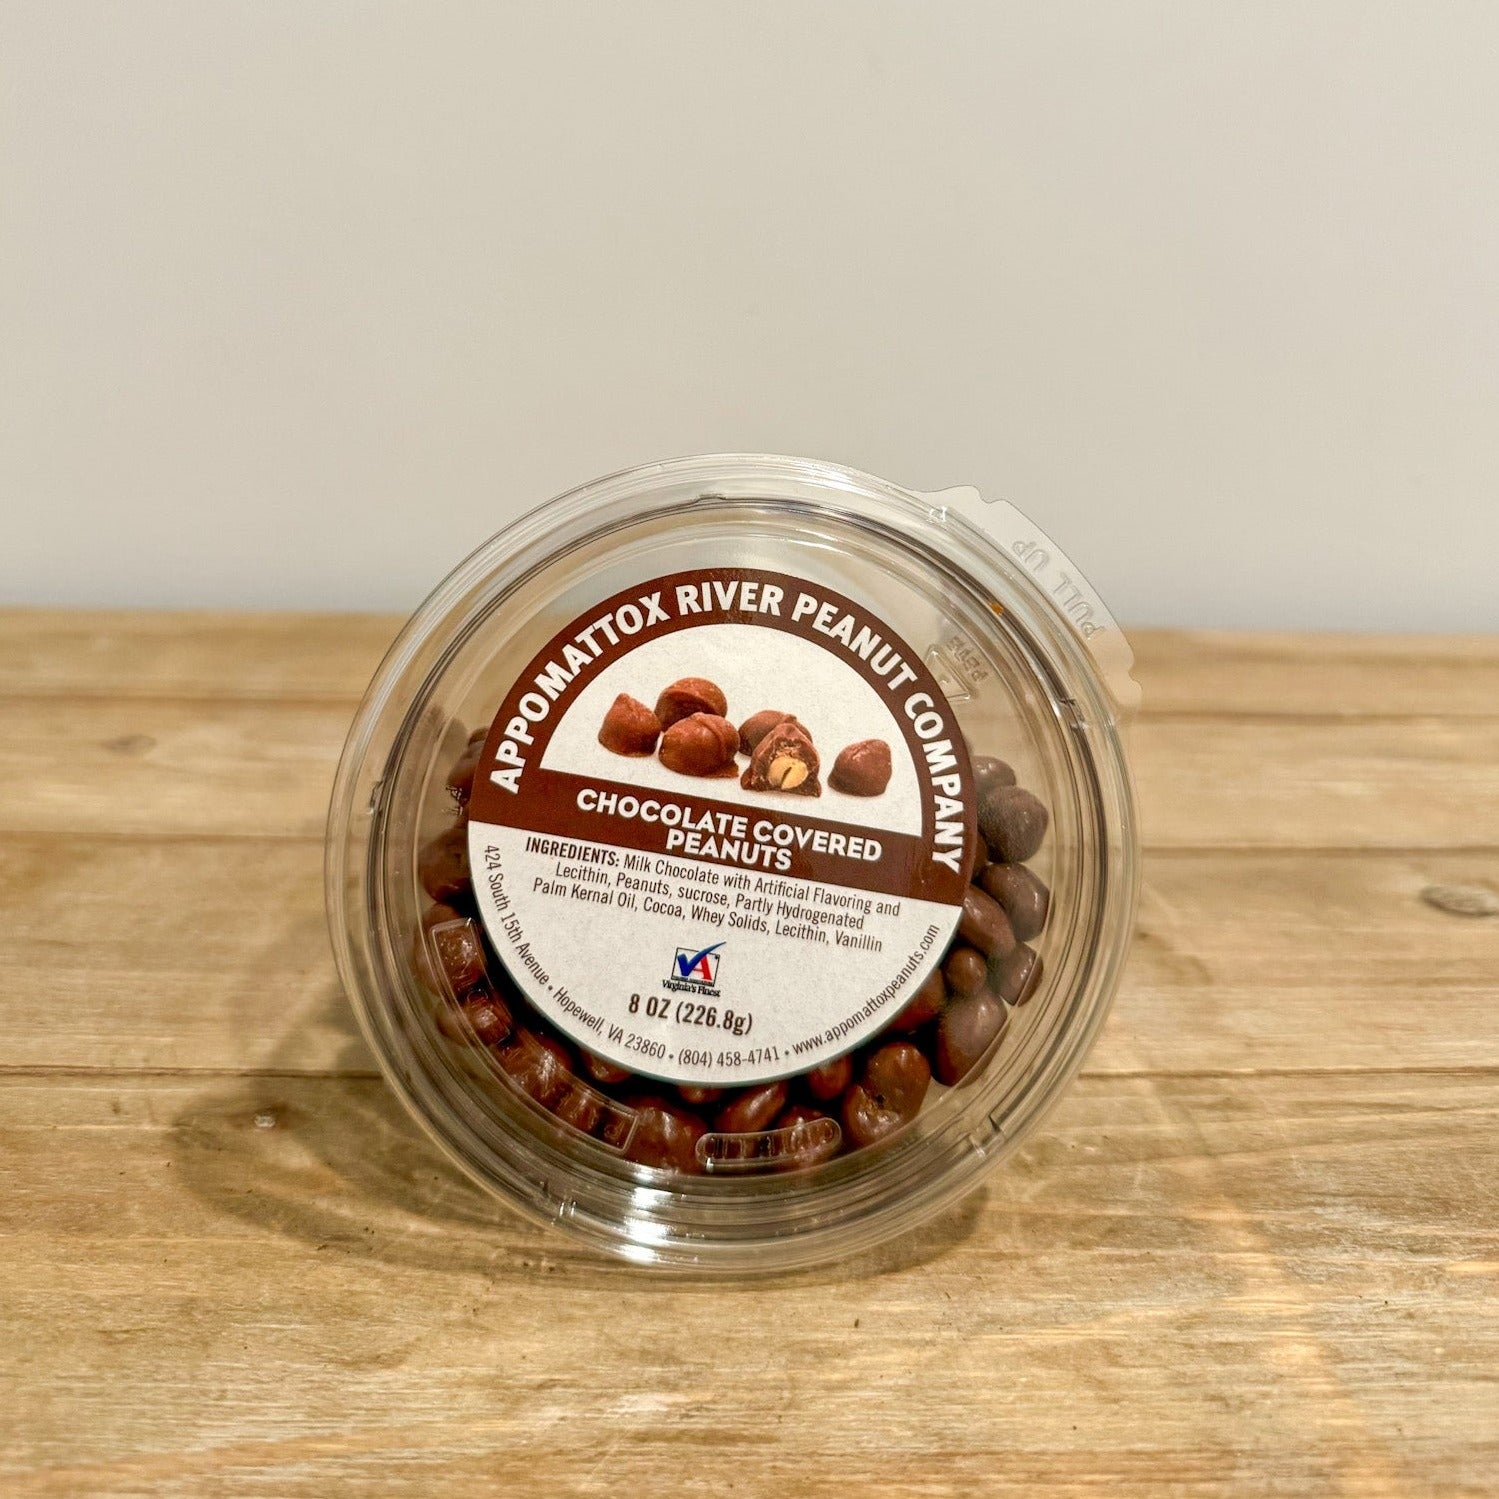 Chocolate covered peanuts 8 oz container.